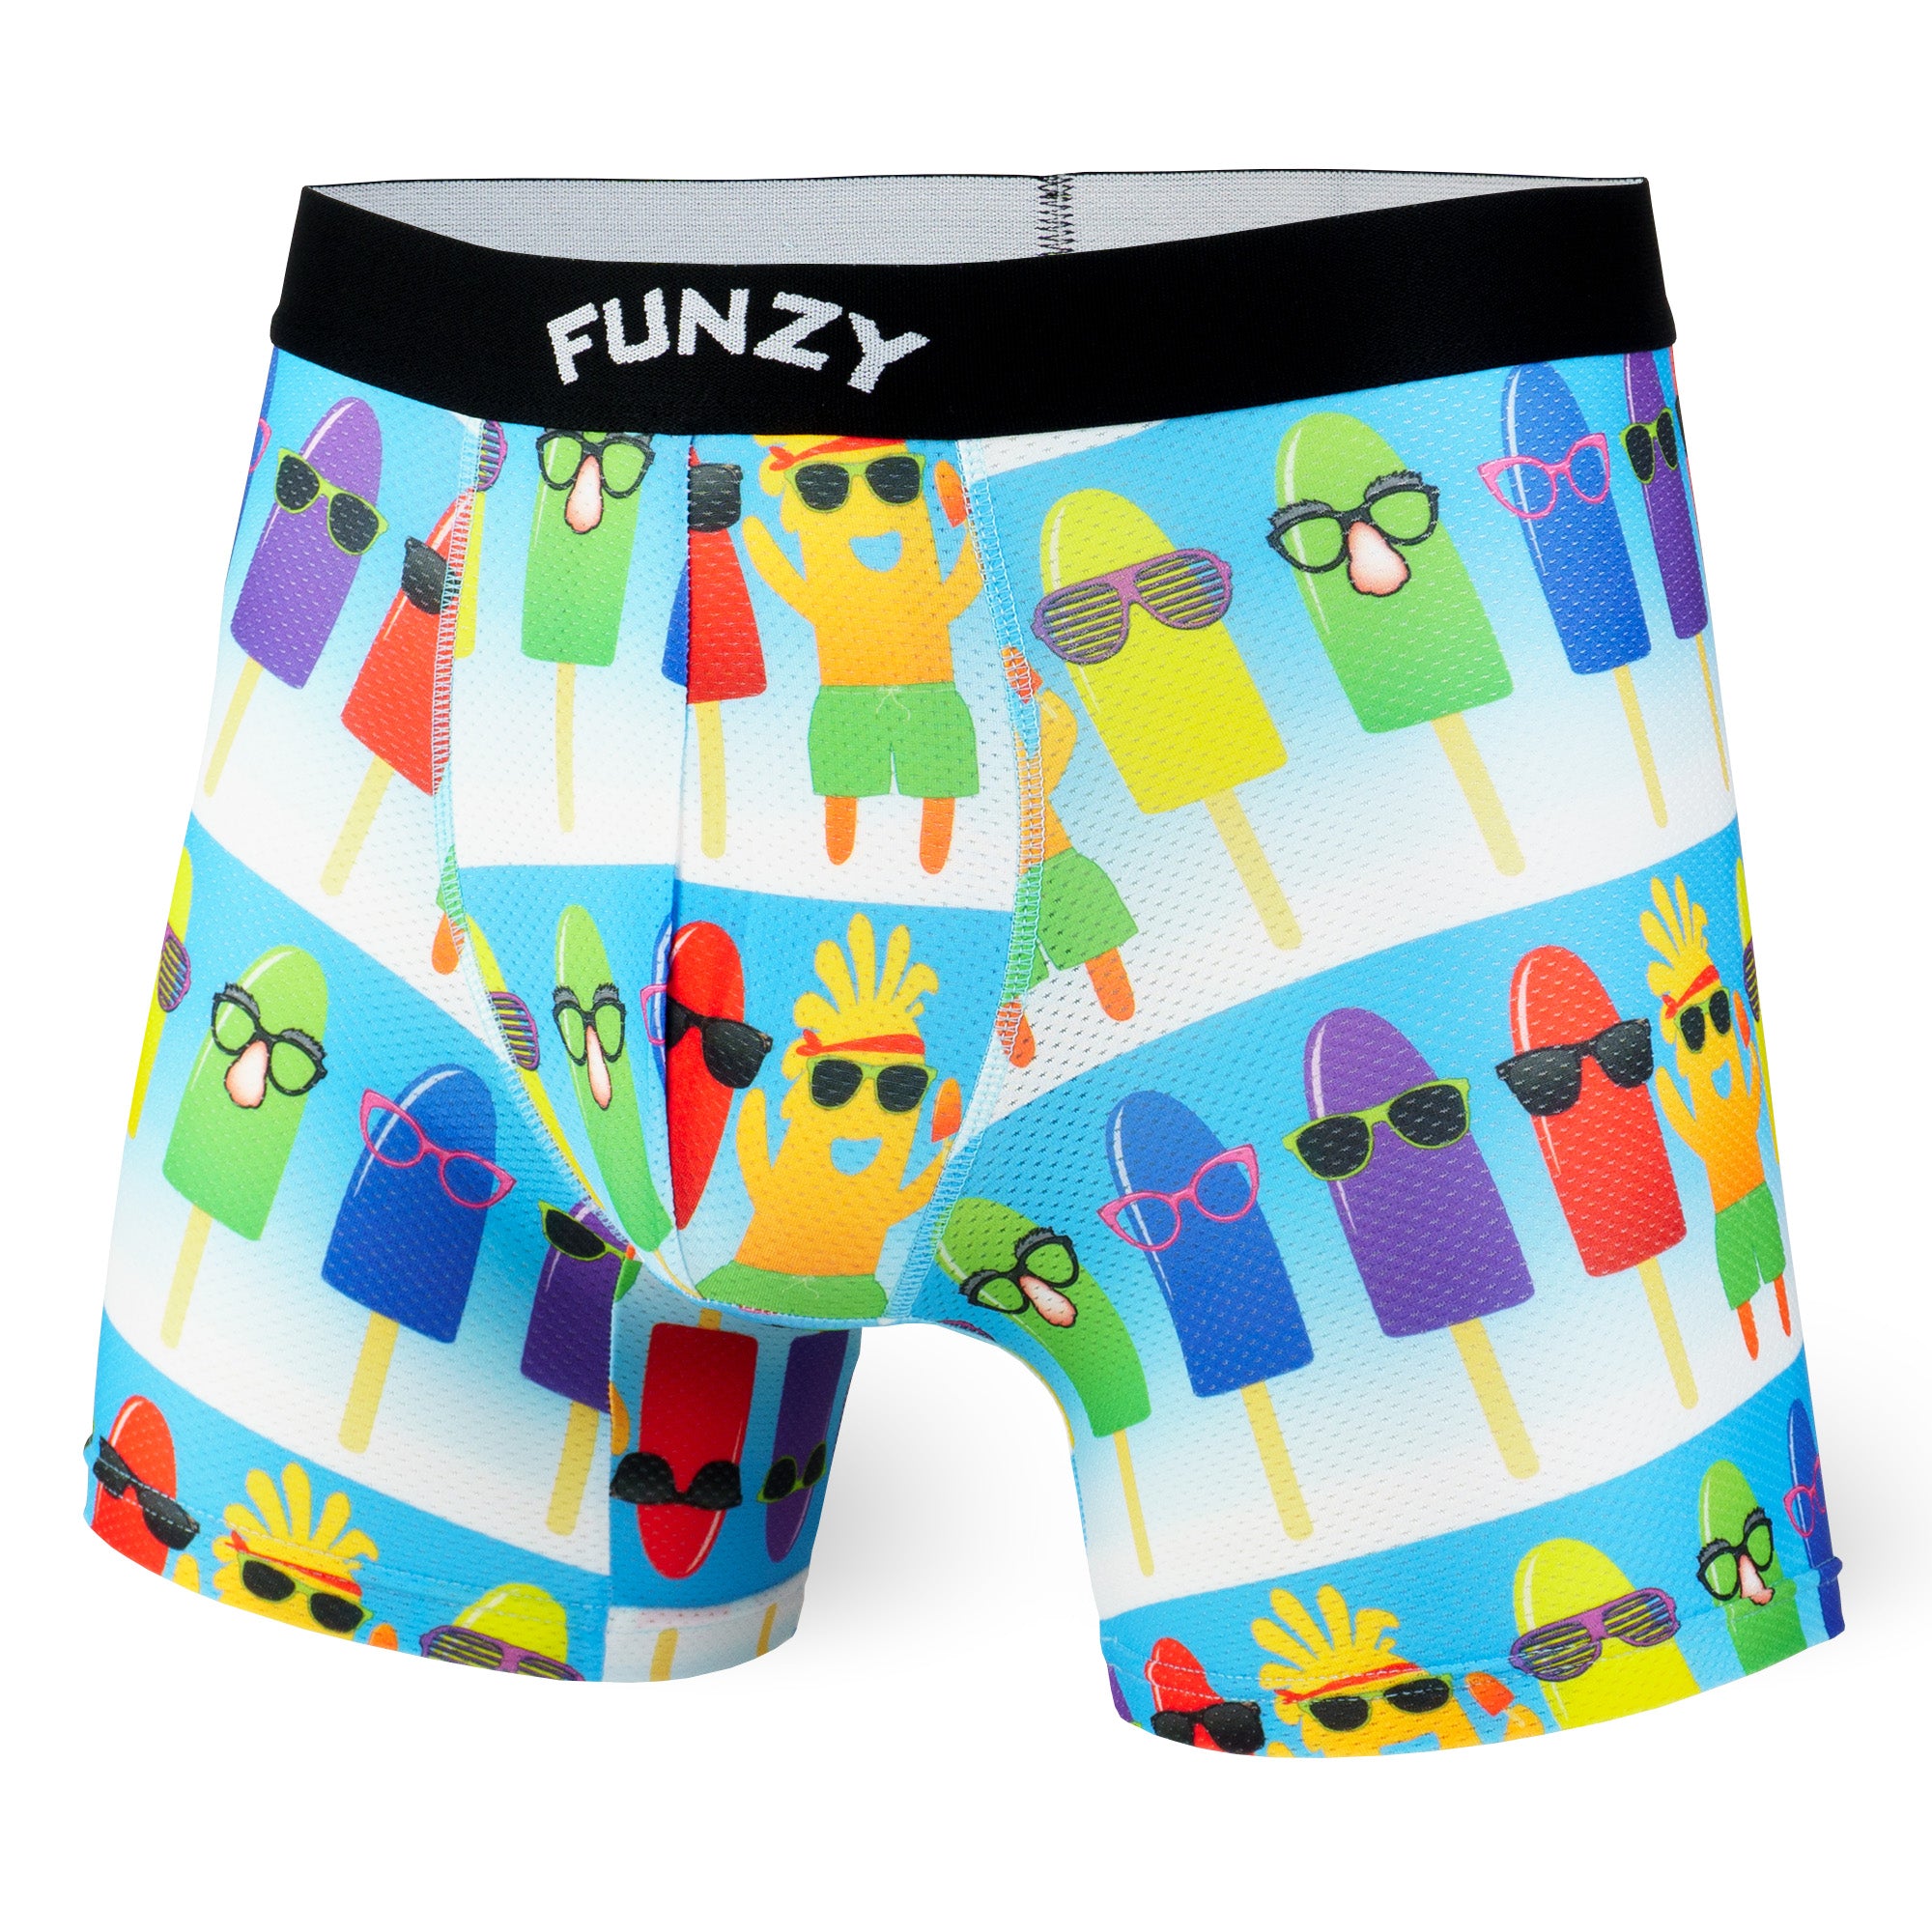 Mystery pack of 3 Funzy boxers